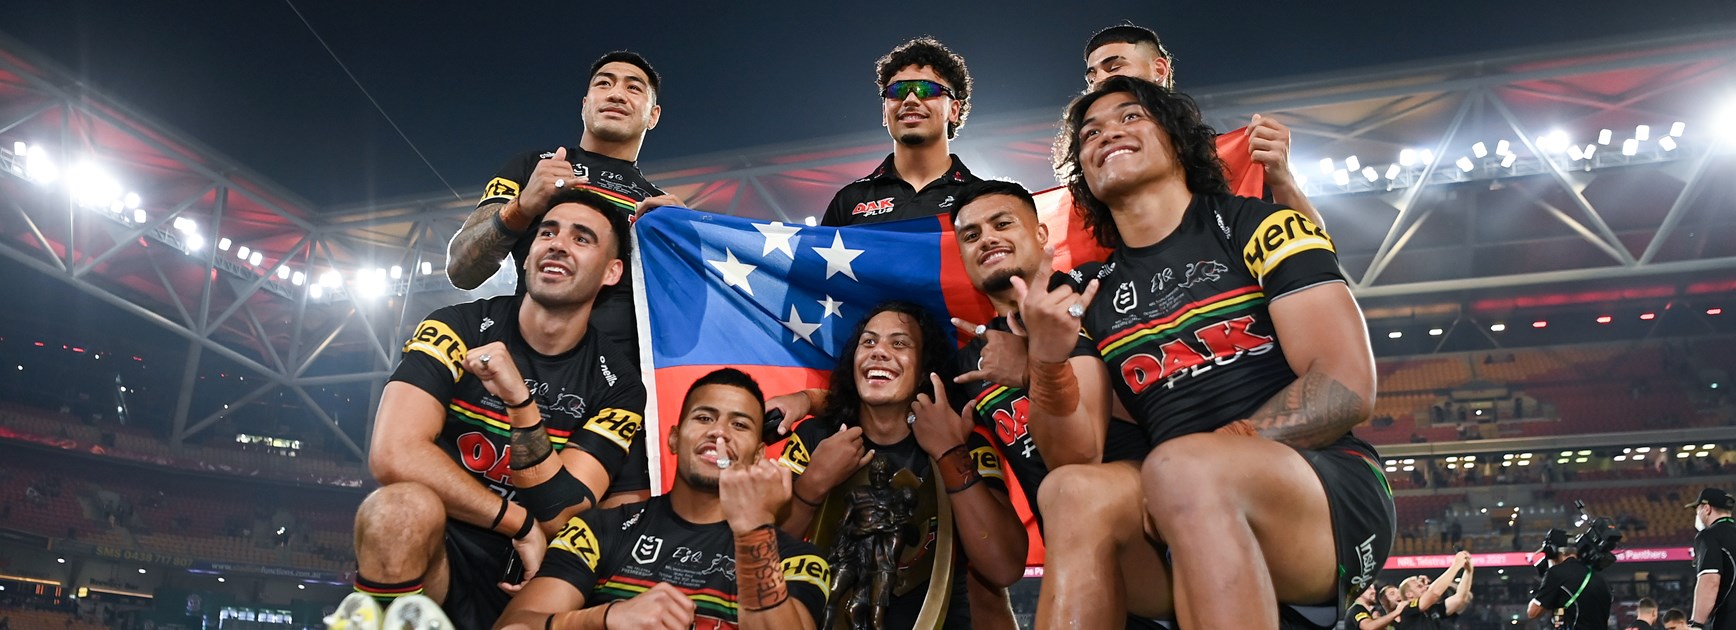 Penrith's Samoan connection celebrate after their 2021 premiership win